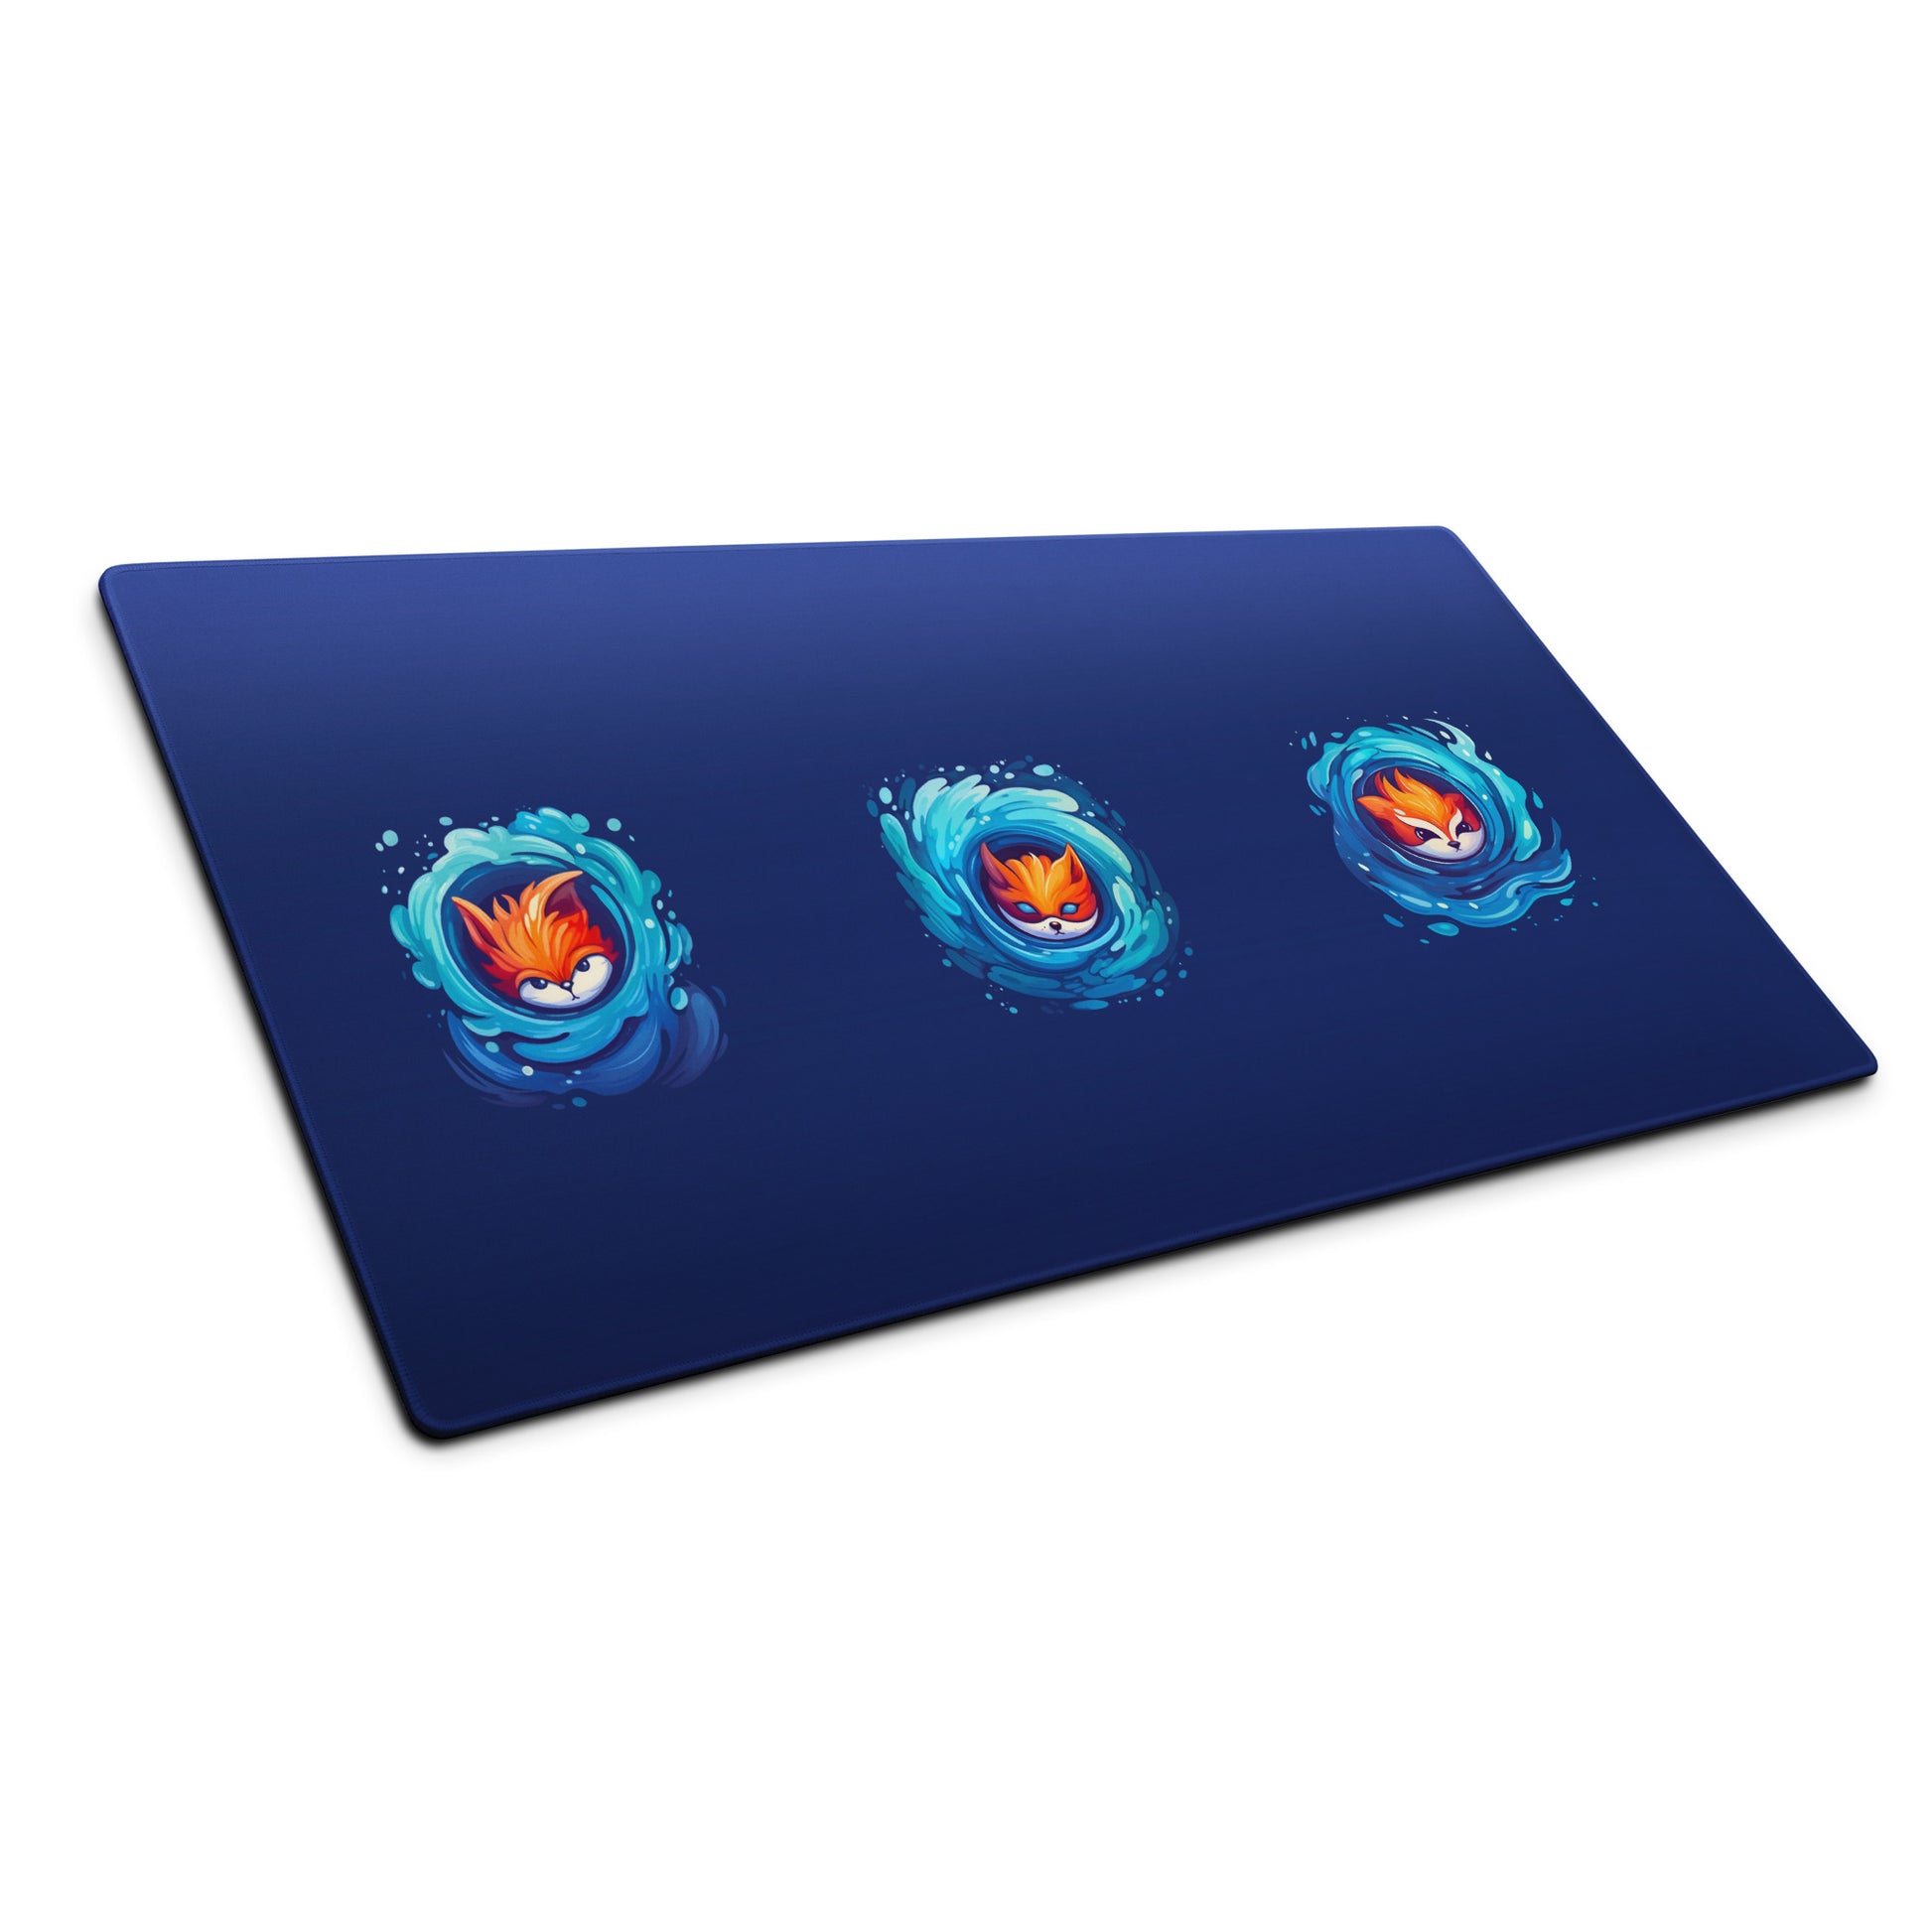 A 36" x 18" blue desk pad with three foxes in whirlpools sitting at an angle.